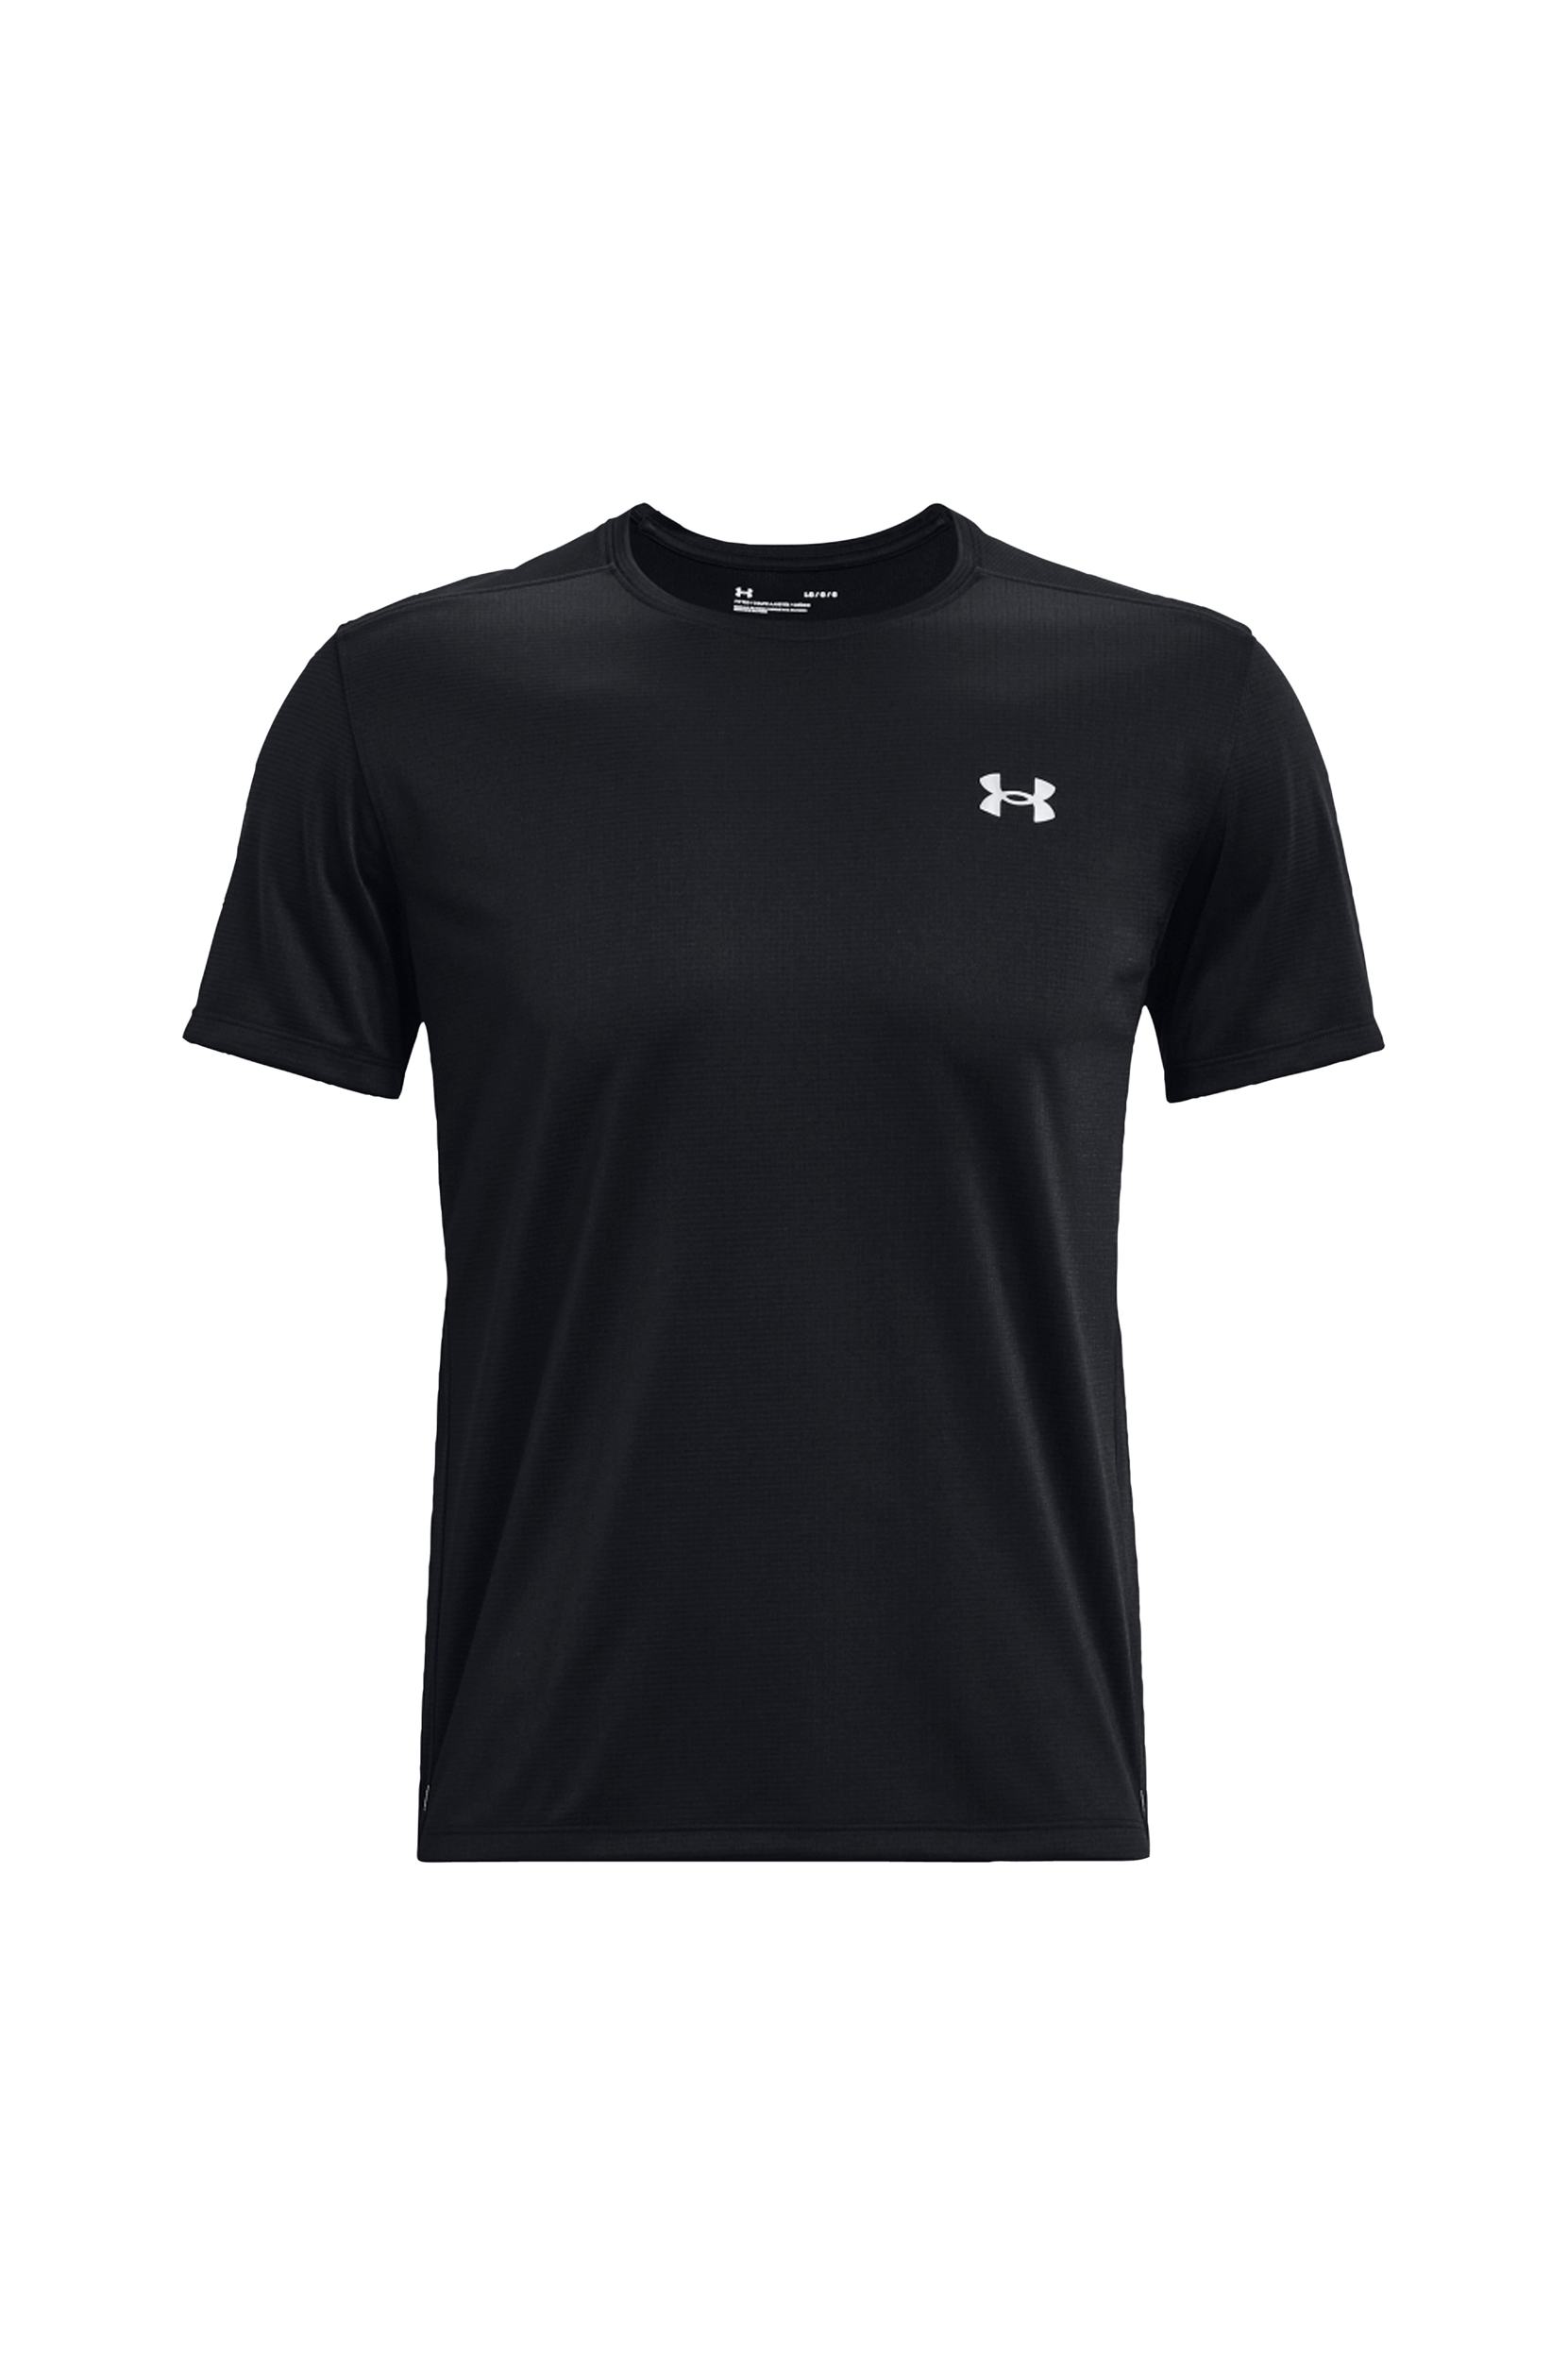 Under Armour - Løbe-t-shirt UA Speed Stride 2.0 Tee - Sort - M